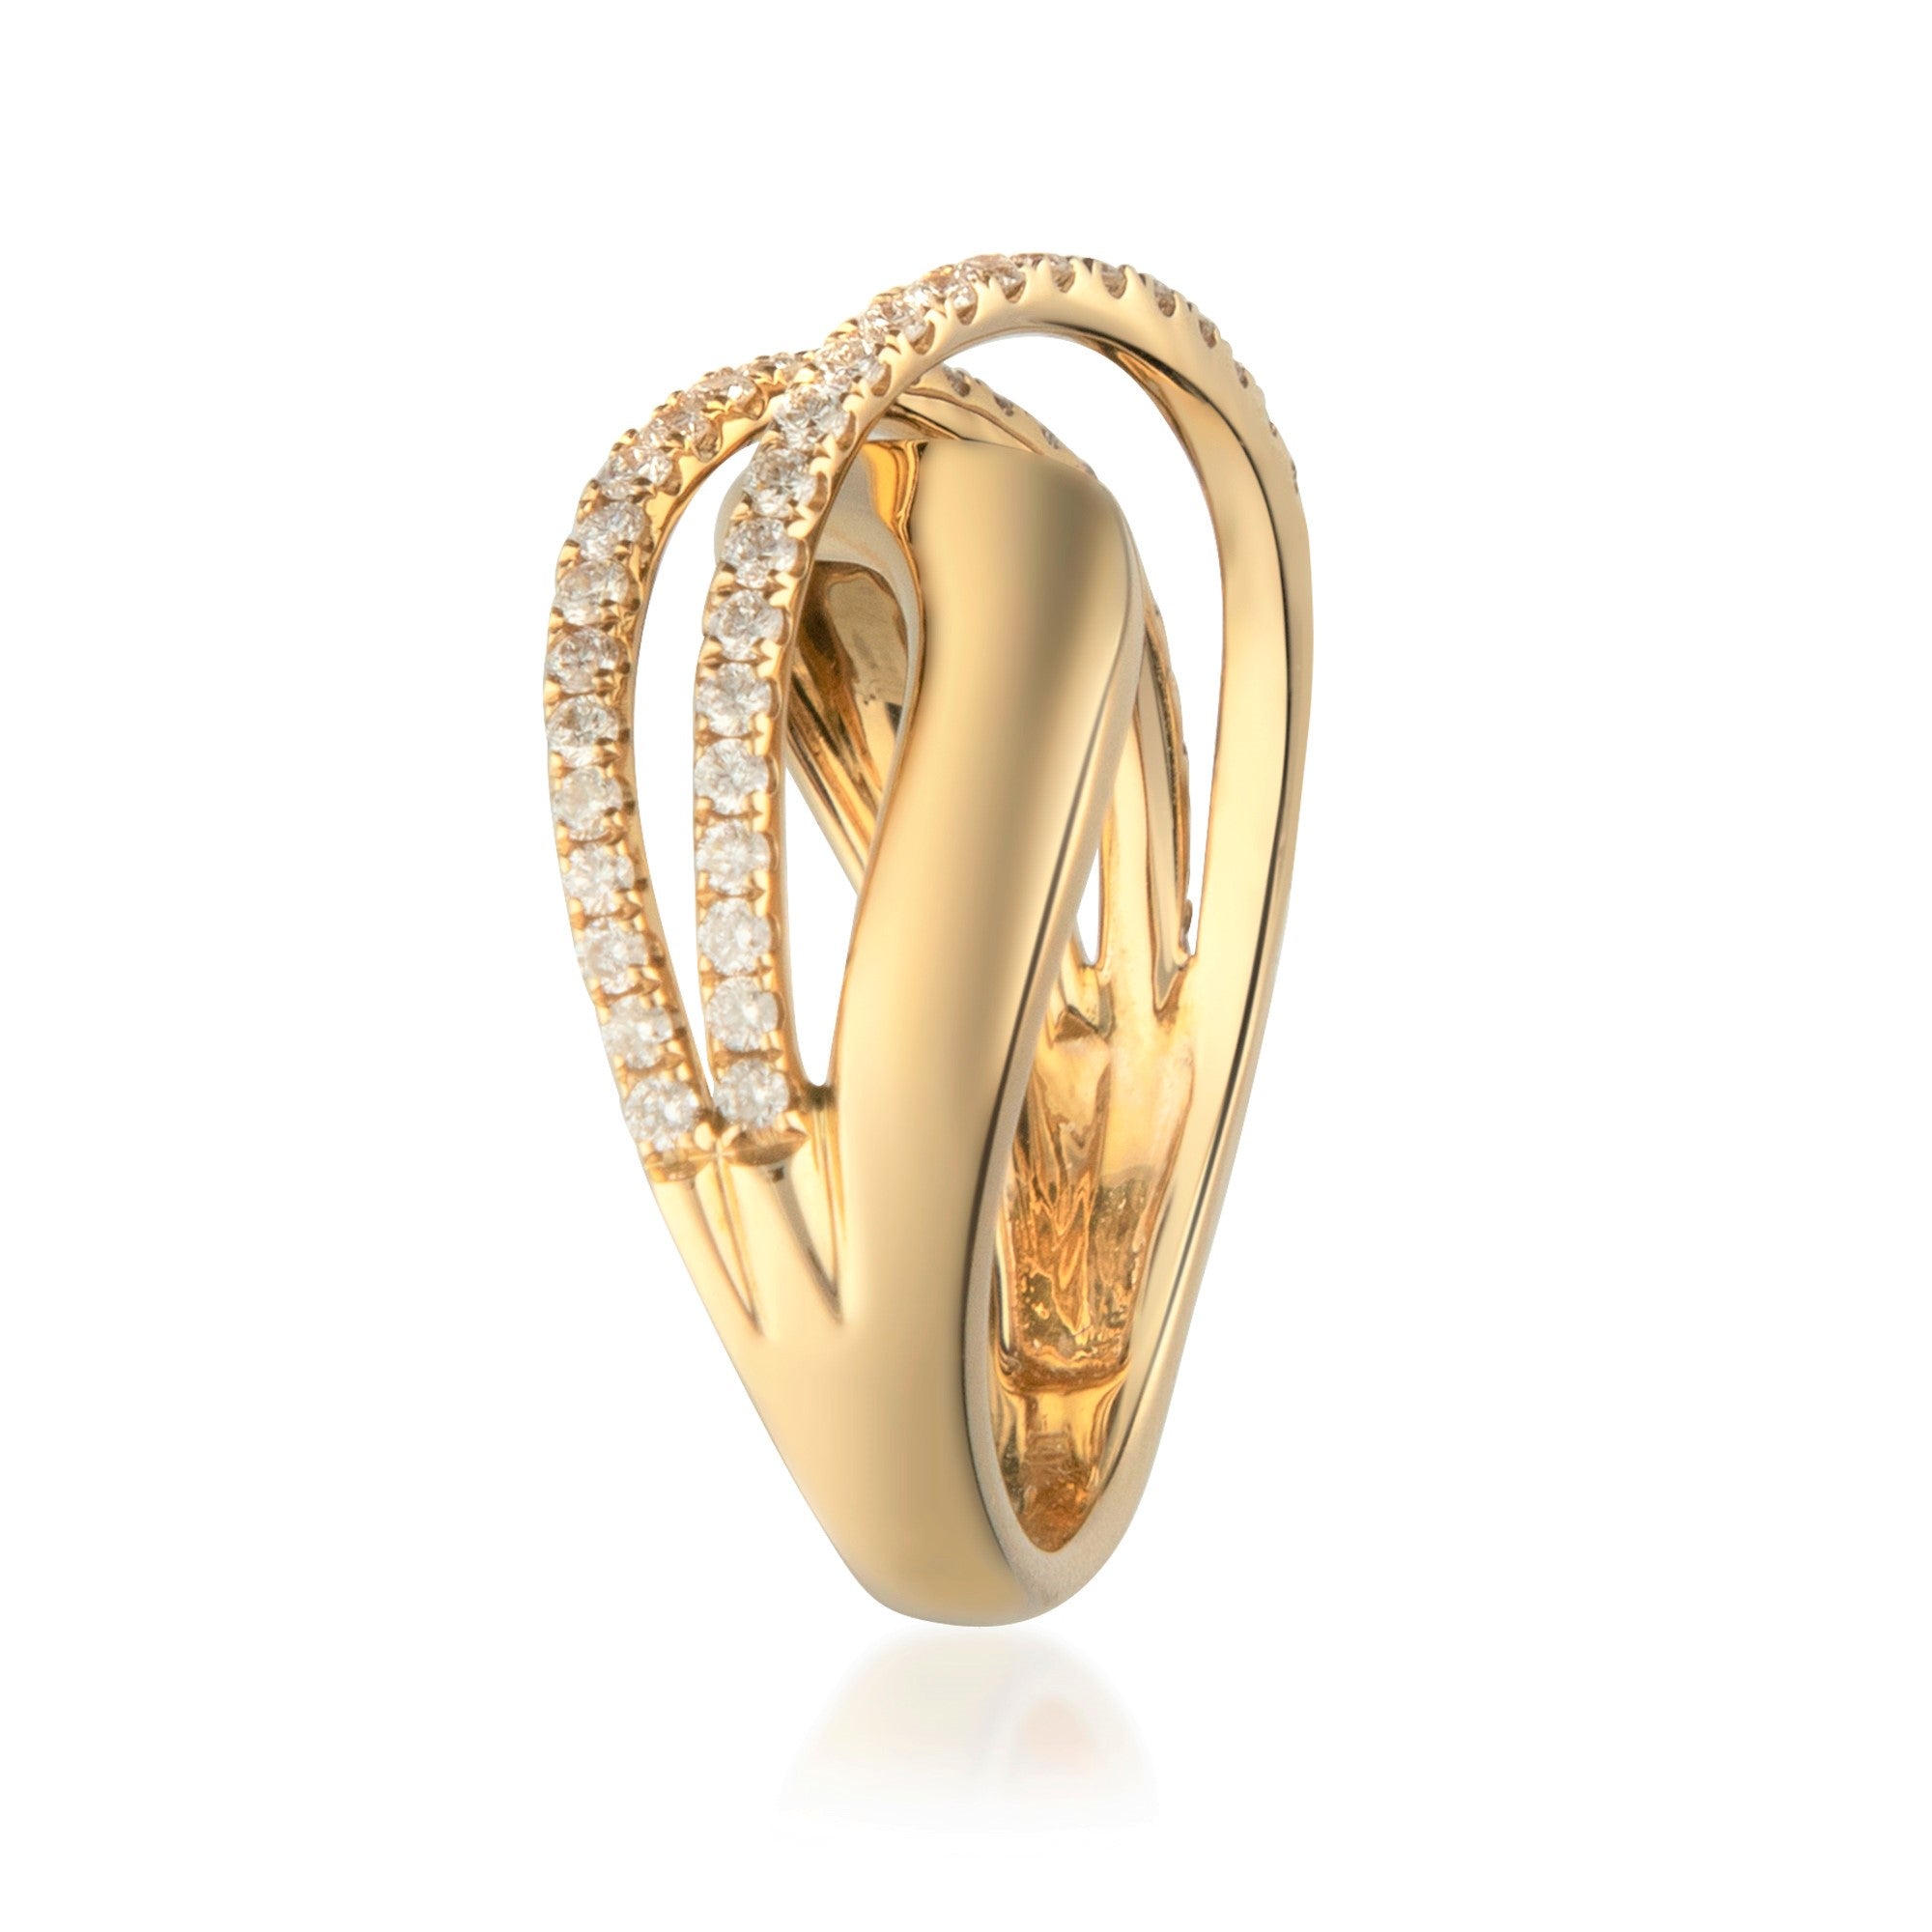 Dropship 14K Gold Chunky Rings For Women Hammered Surface Band Ring  Overlapping Classical Ring Criss Cross Rings Trendy Statement Thick Knuckle Rings  Size 10 to Sell Online at a Lower Price